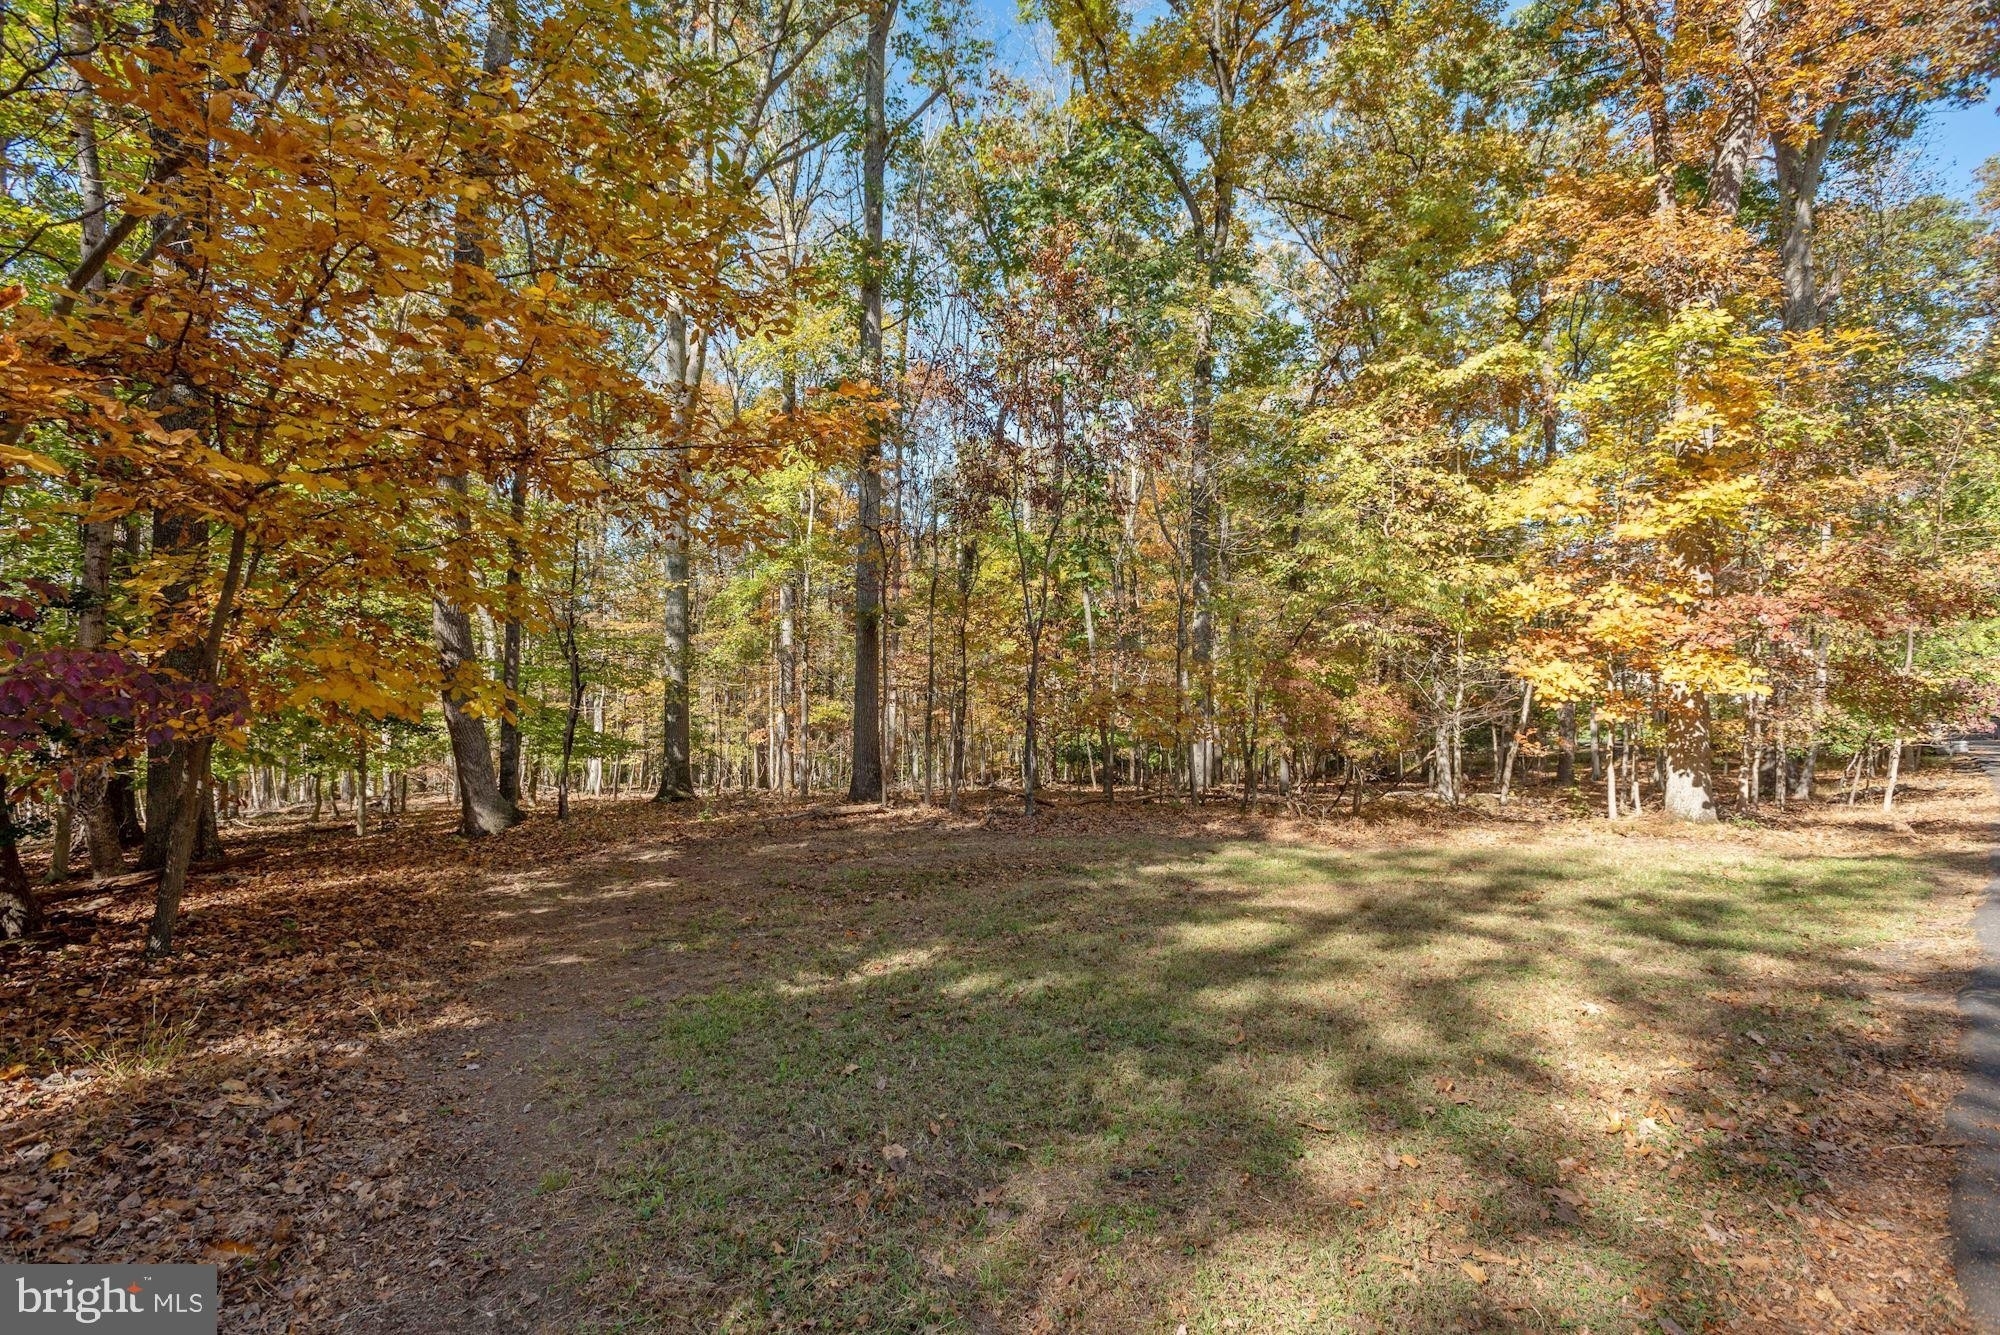 3. Land for Sale at Great Falls, VA 22066